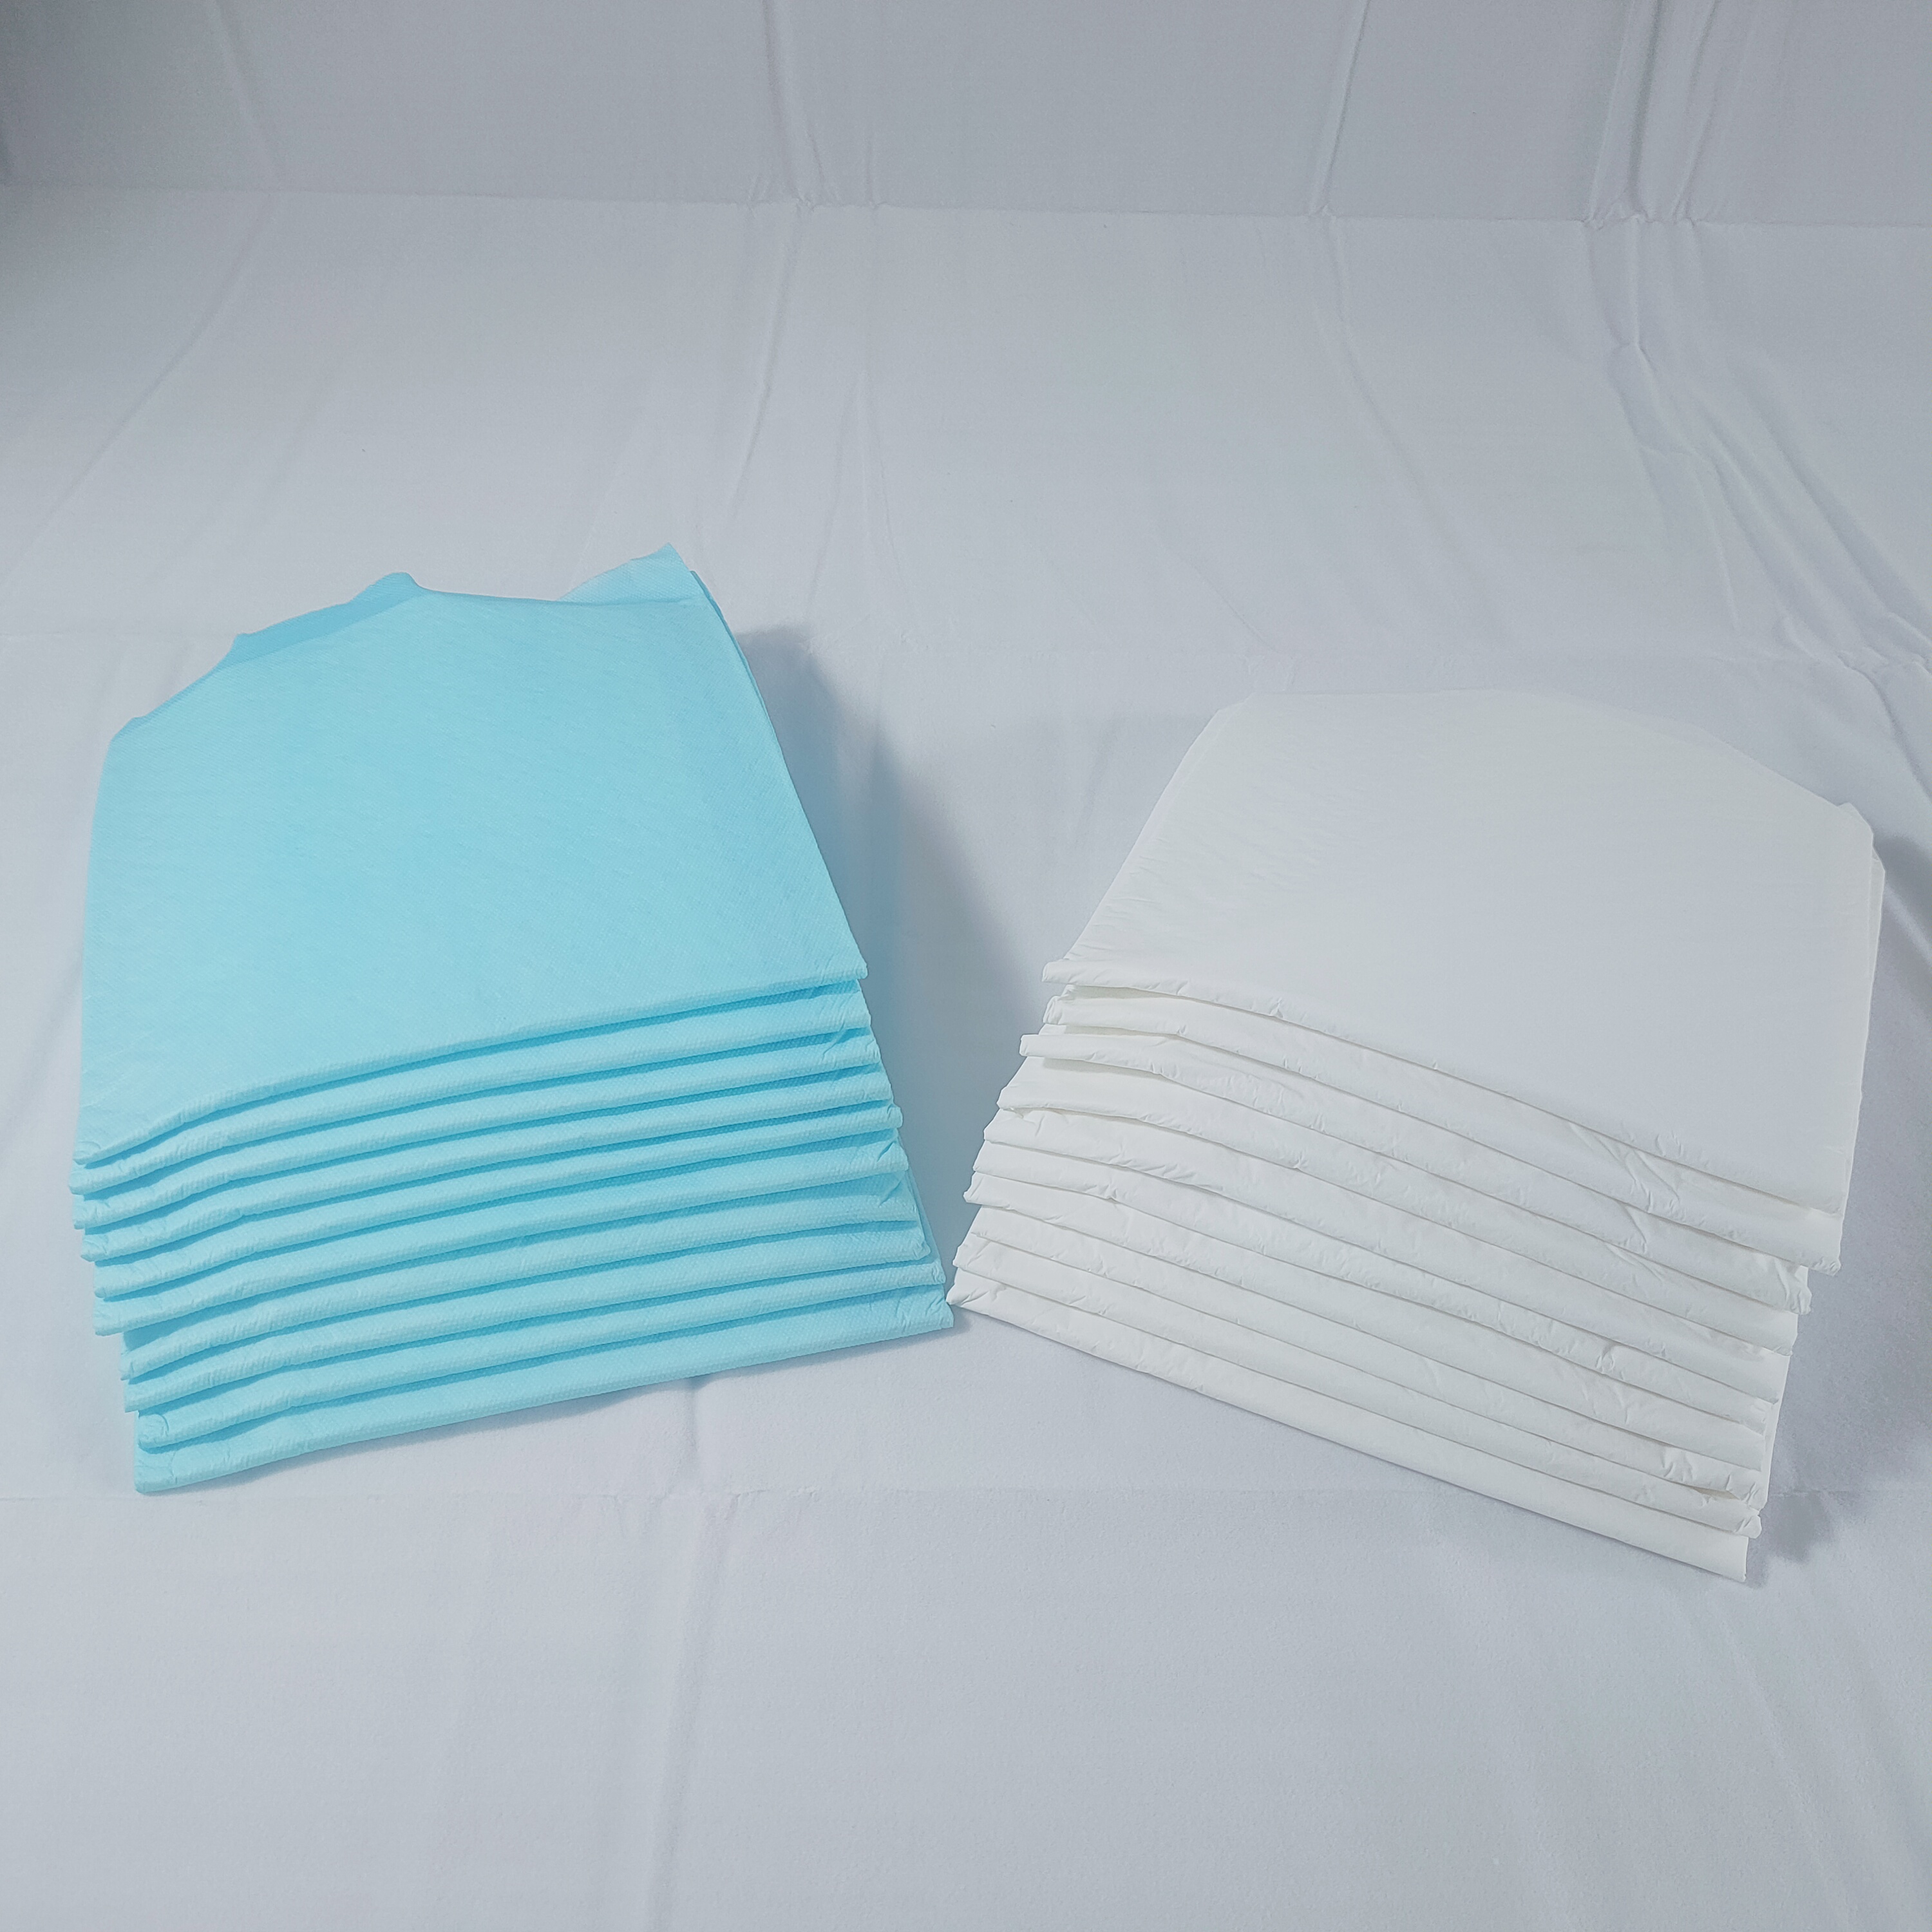 Patient Non-Slip Hospital Bed Pads for Incontinence Under PED - China  Patient Non-Slip Pads and Hospital Bed Pads price